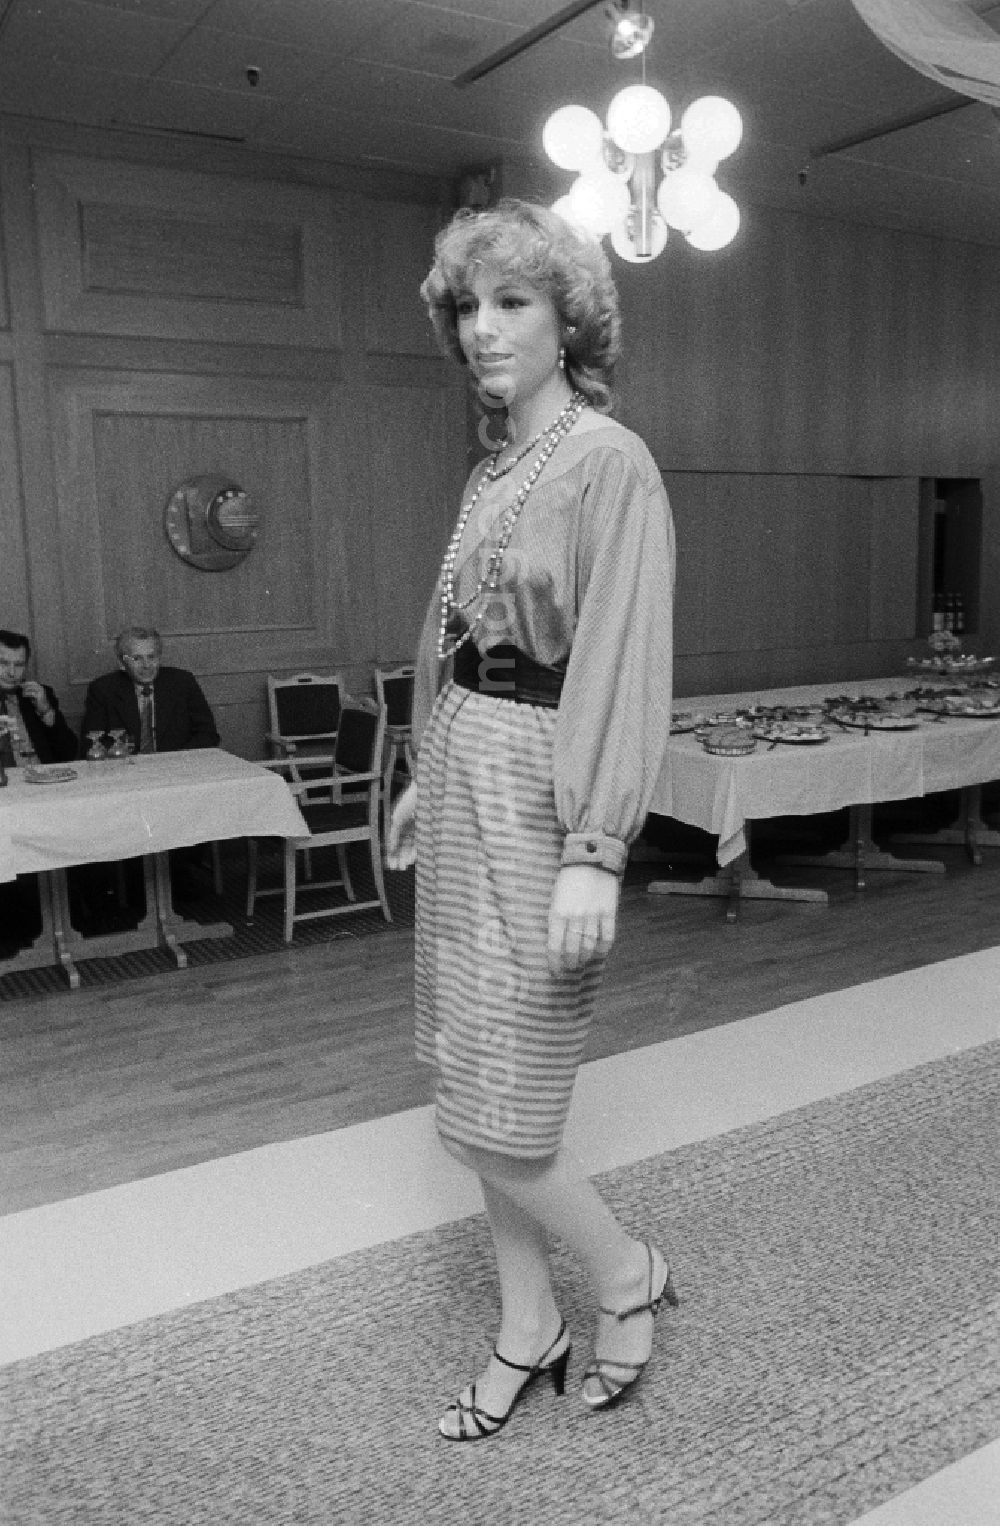 GDR photo archive: Berlin - Fashion show in the convention hall, today bcc Berlin Congress centre, in Berlin, the former capital of the GDR, German democratic republic